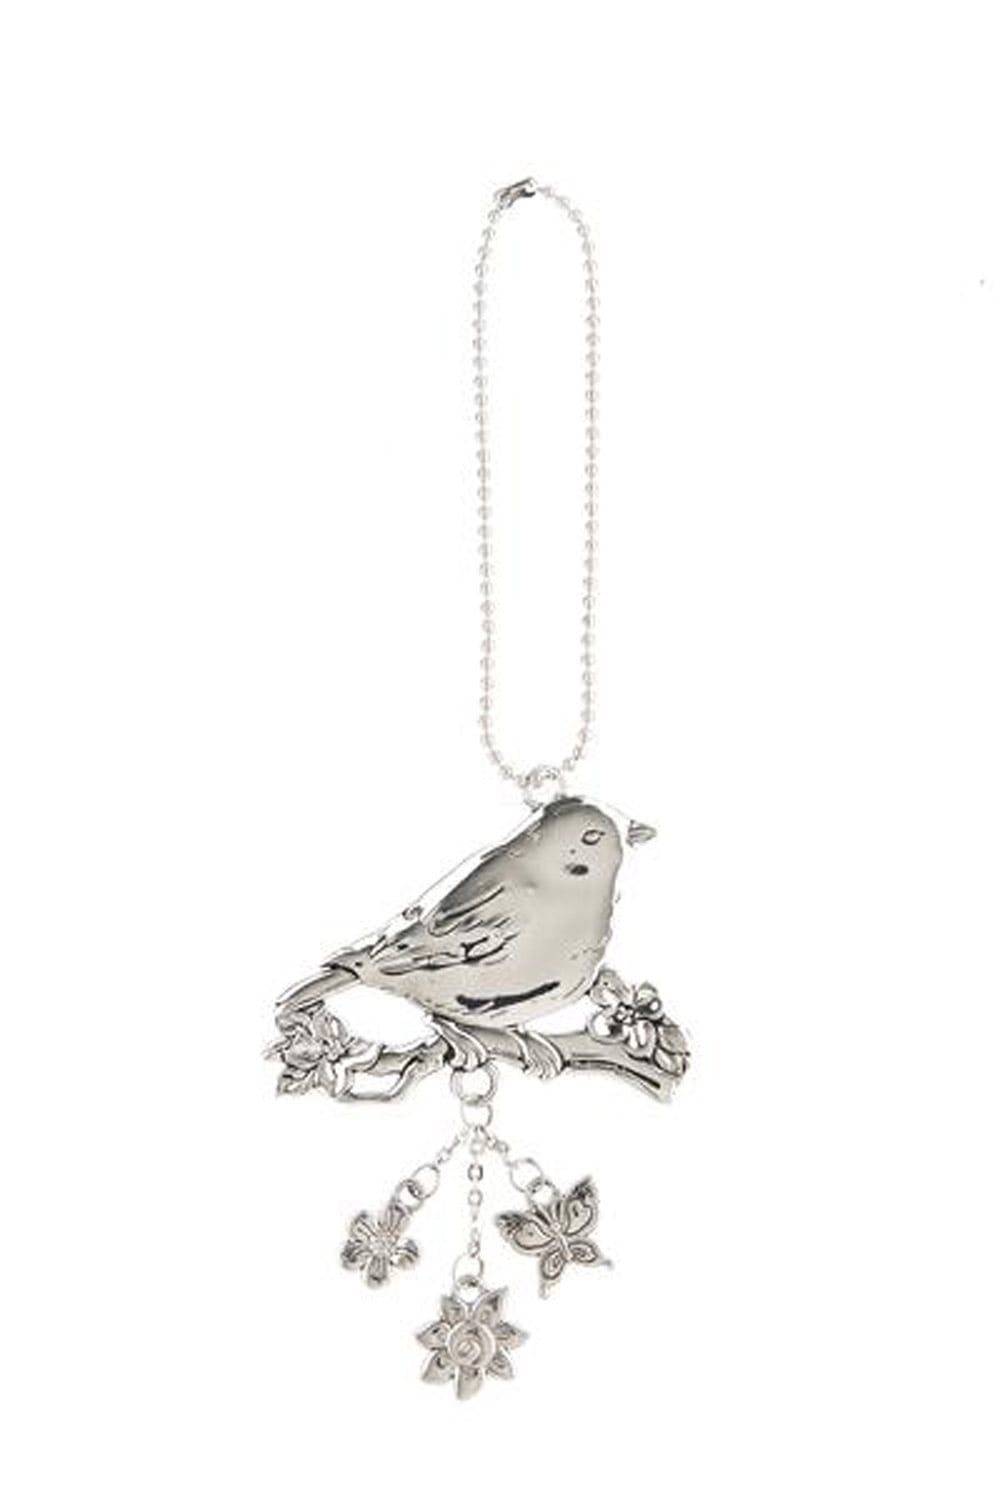 by Ganz FIND BEAUTY IN EVERY DAY Metal Bird Ornament/Car Charm 